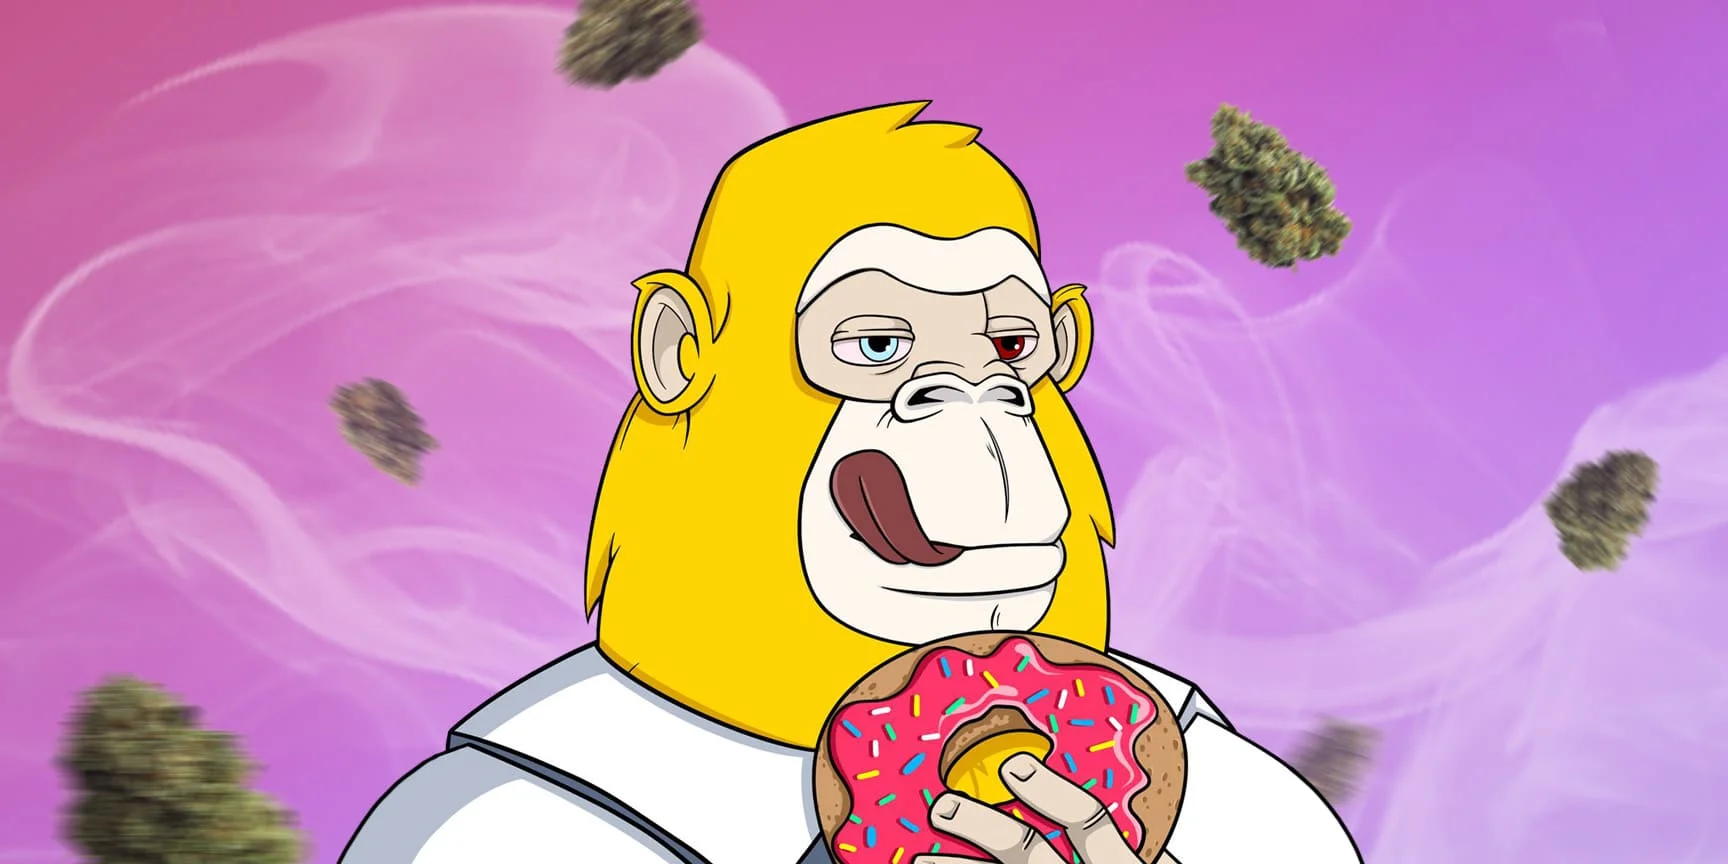 Ape with donut